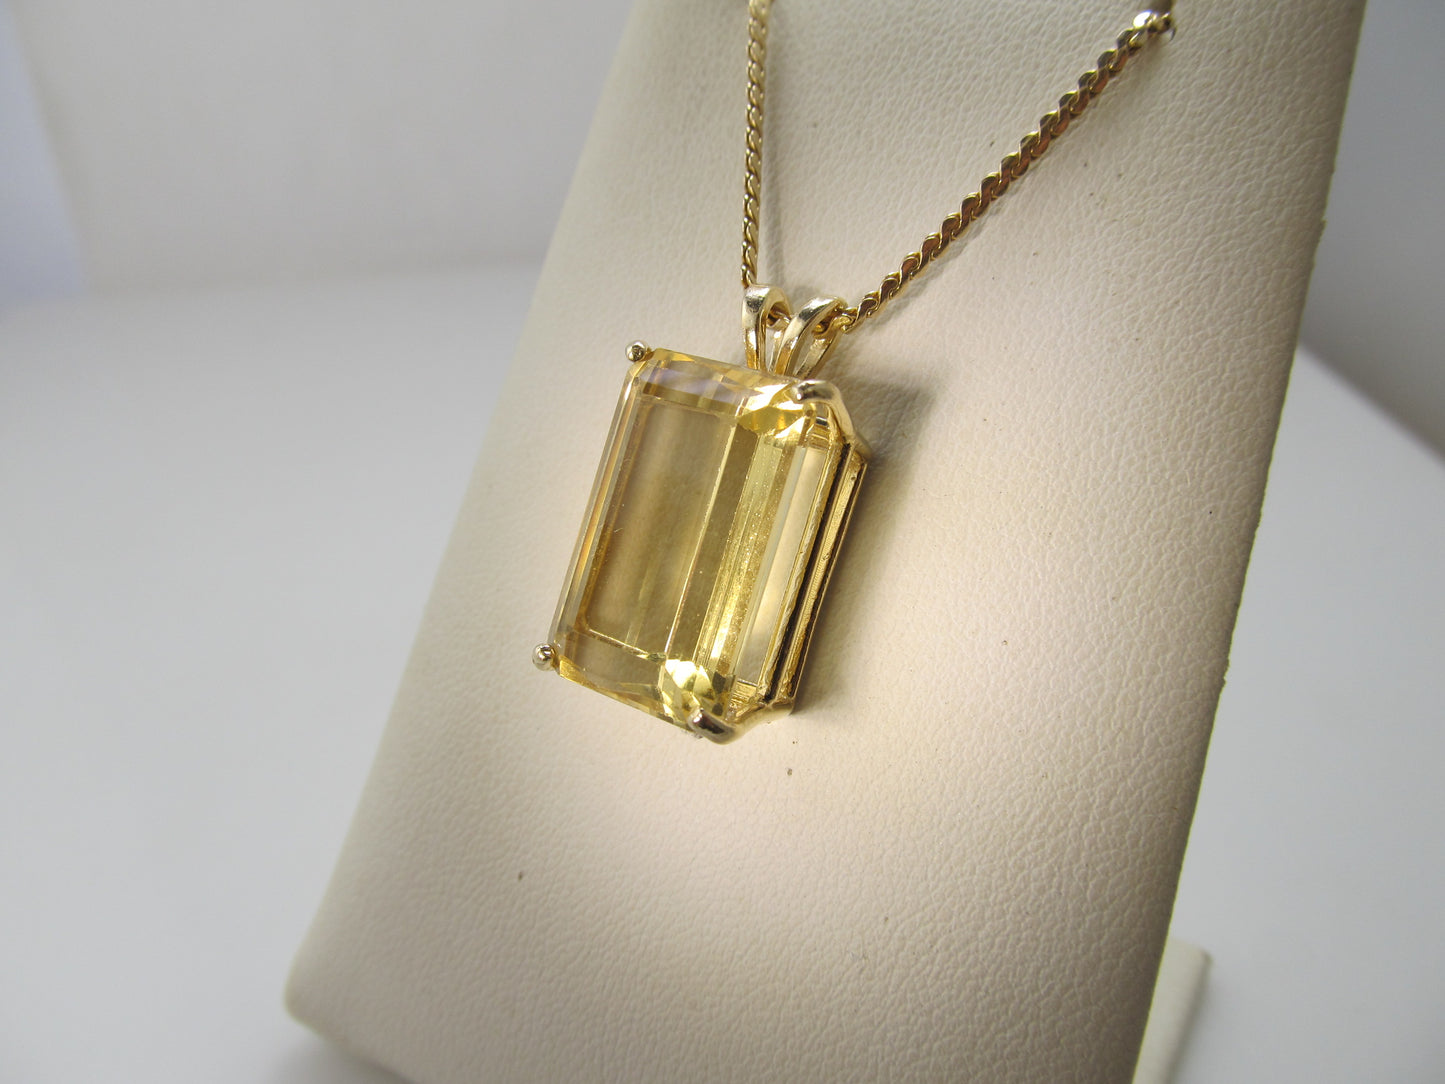 Sunny 12.50ct citrine necklace, 14k yellow gold